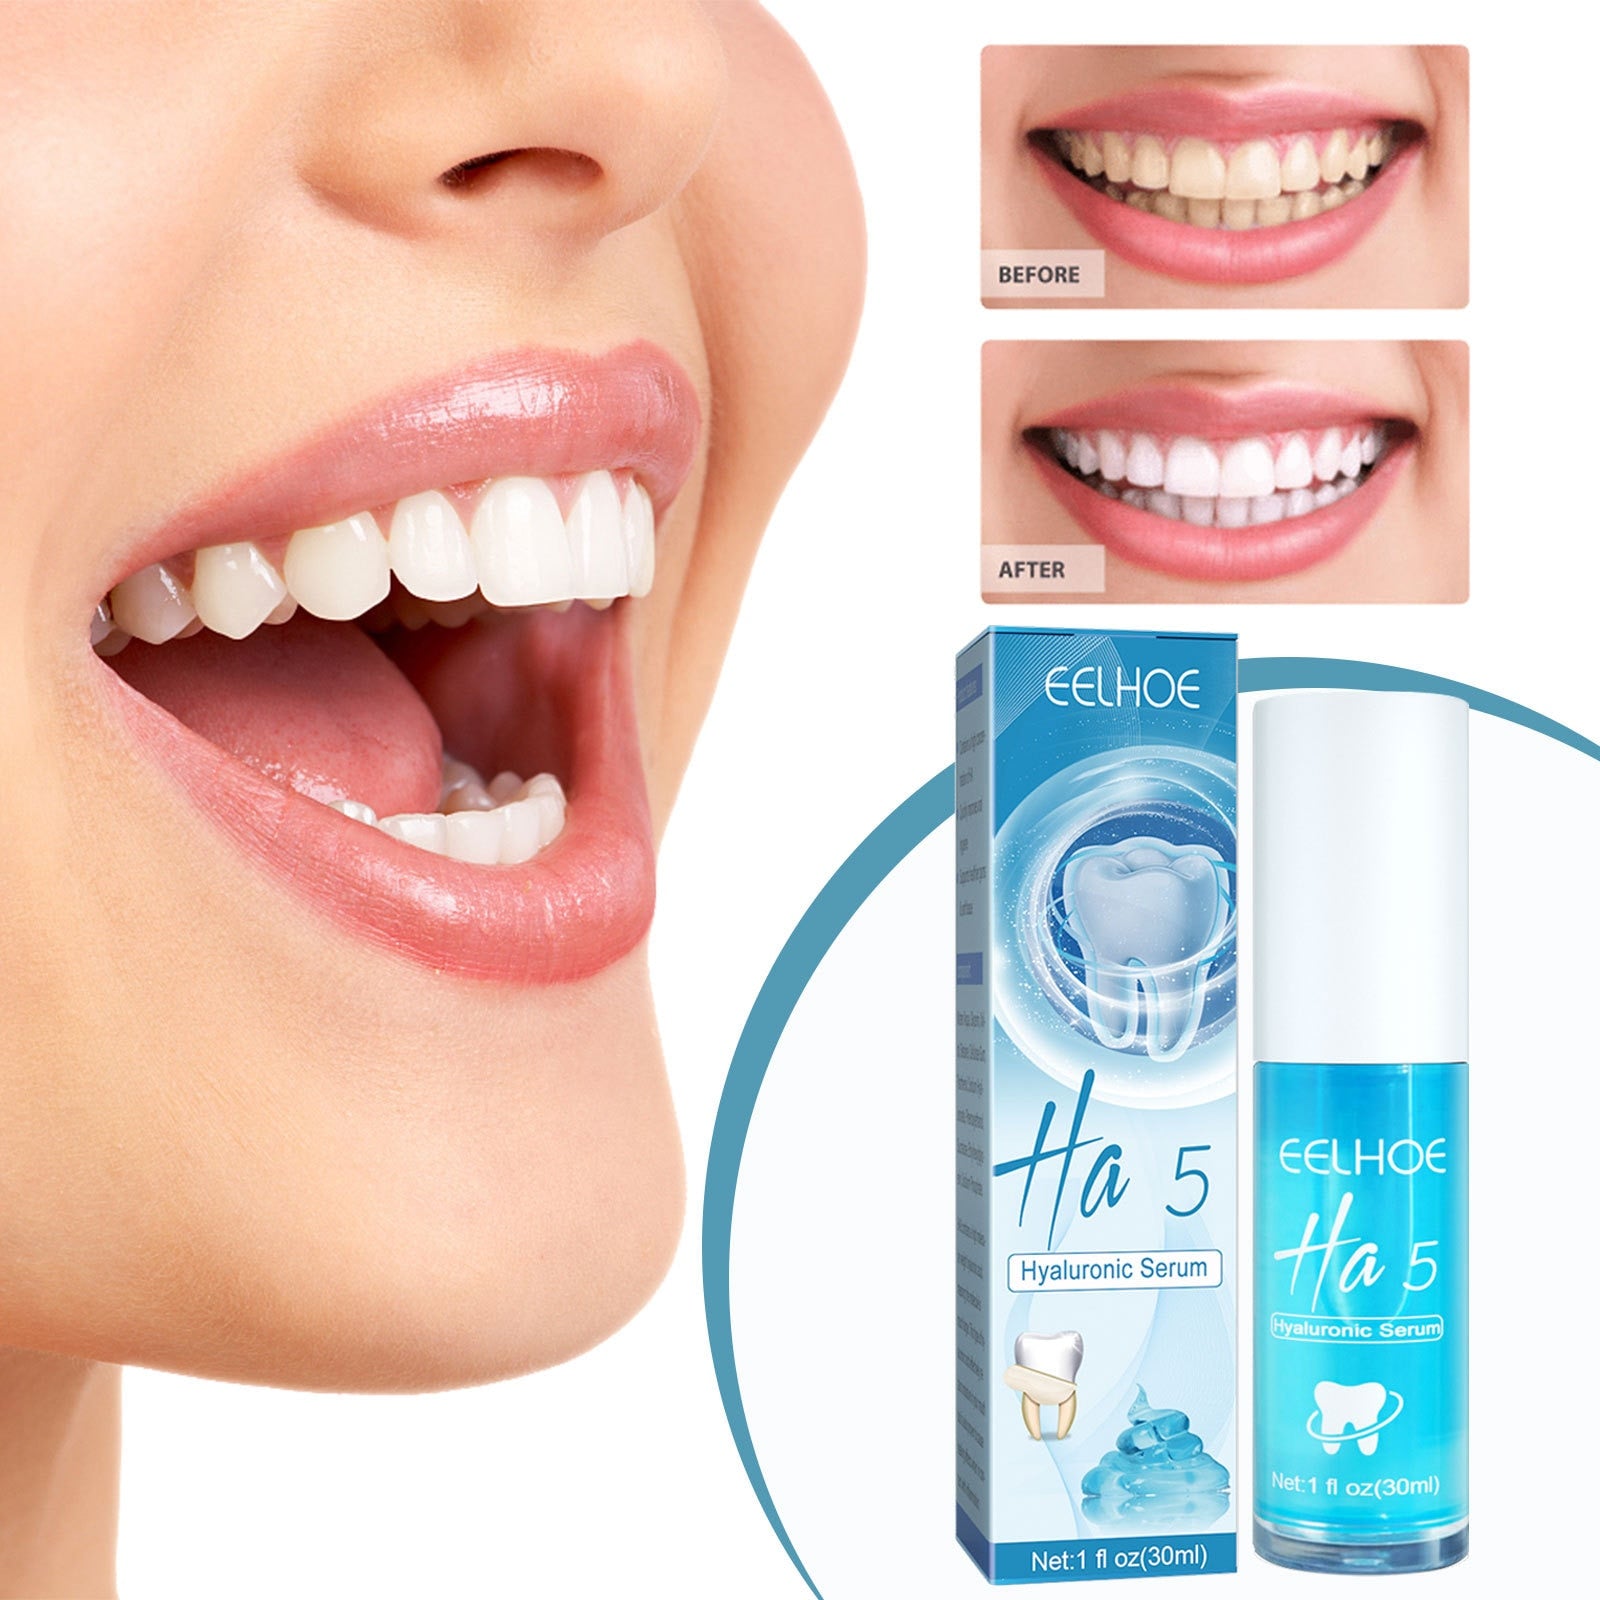 Beyprern HA 5 Repair Toothpaste For Adult Teeth Whitening Dental Products Mouth Odour Bad Breath Remover Smoke Stain Cleaning Tooth Paste